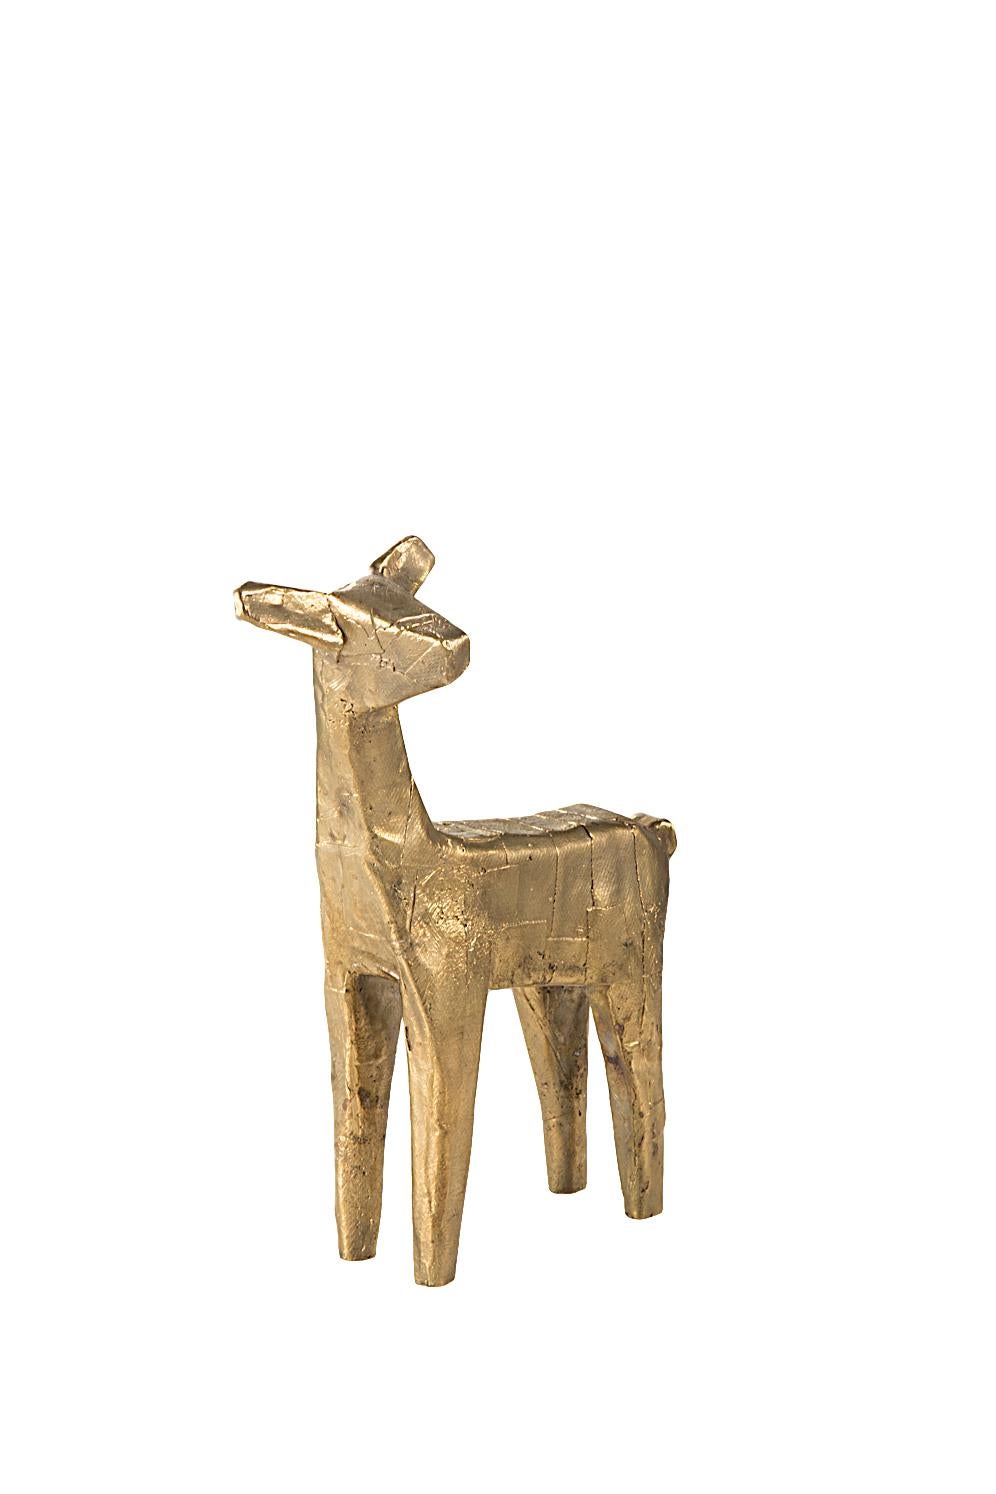 Deer sculpture by Pulpo
Dimensions: D14 x W7 x H18 cm
Materials: bronze

A crash, a tower, a herd, a flock. However you name this group, they simply belong together. Stirred by explorations into nature and art, German designer Kai Linke has